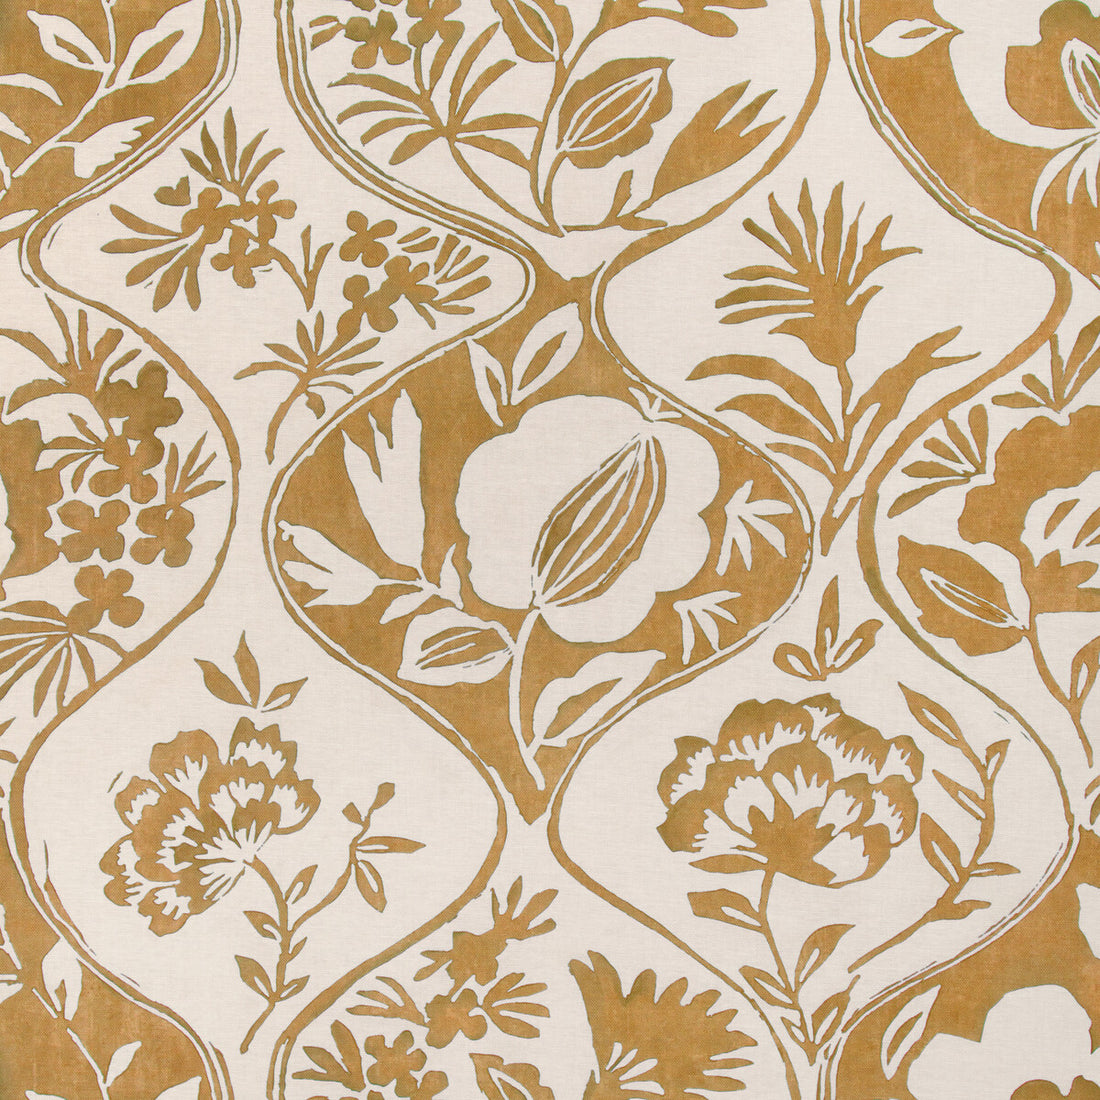 Calathea Print fabric in gold color - pattern 2023141.40.0 - by Lee Jofa in the Garden Walk collection